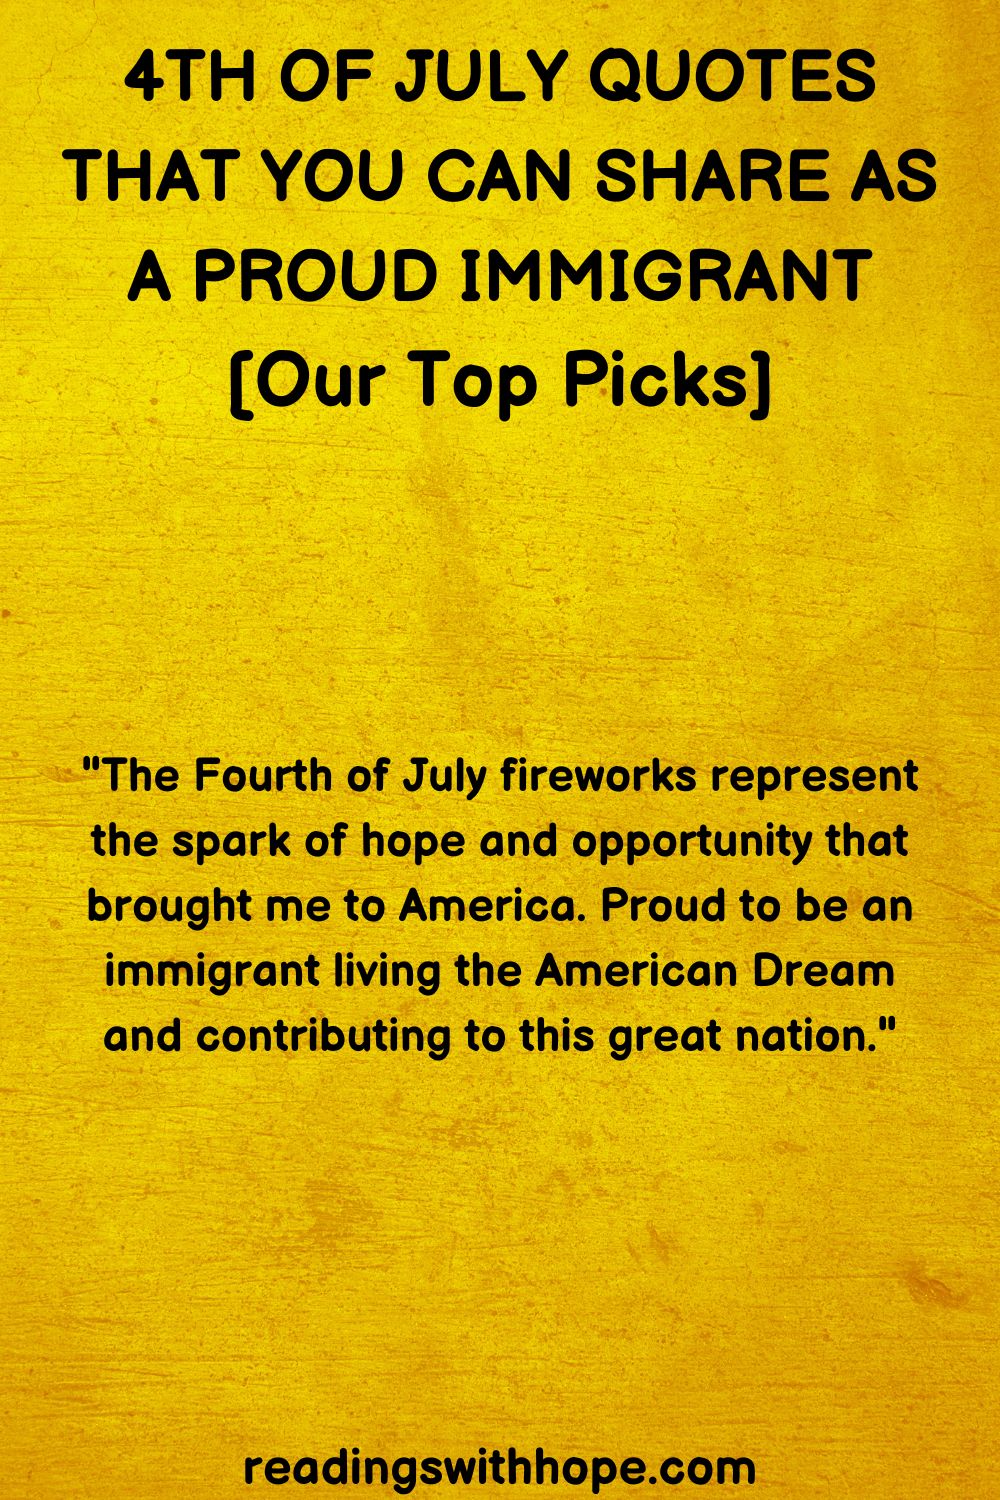 4th of July Quotes That You Can Share As a Proud Immigrant